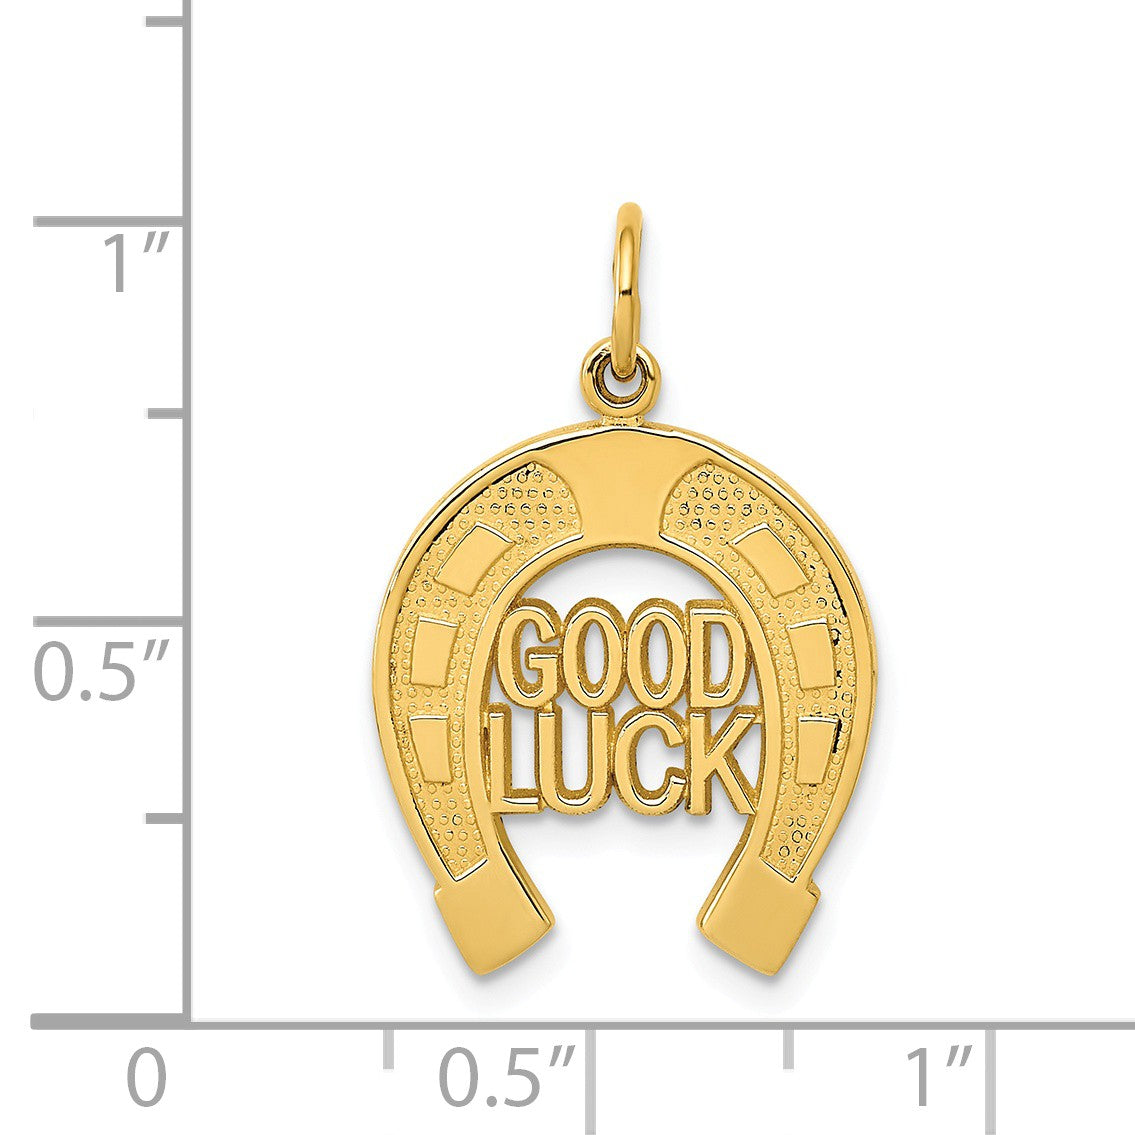 Alternate view of the 14k Yellow Gold Good Luck Horseshoe Charm or Pendant, 15mm (9/16 inch) by The Black Bow Jewelry Co.